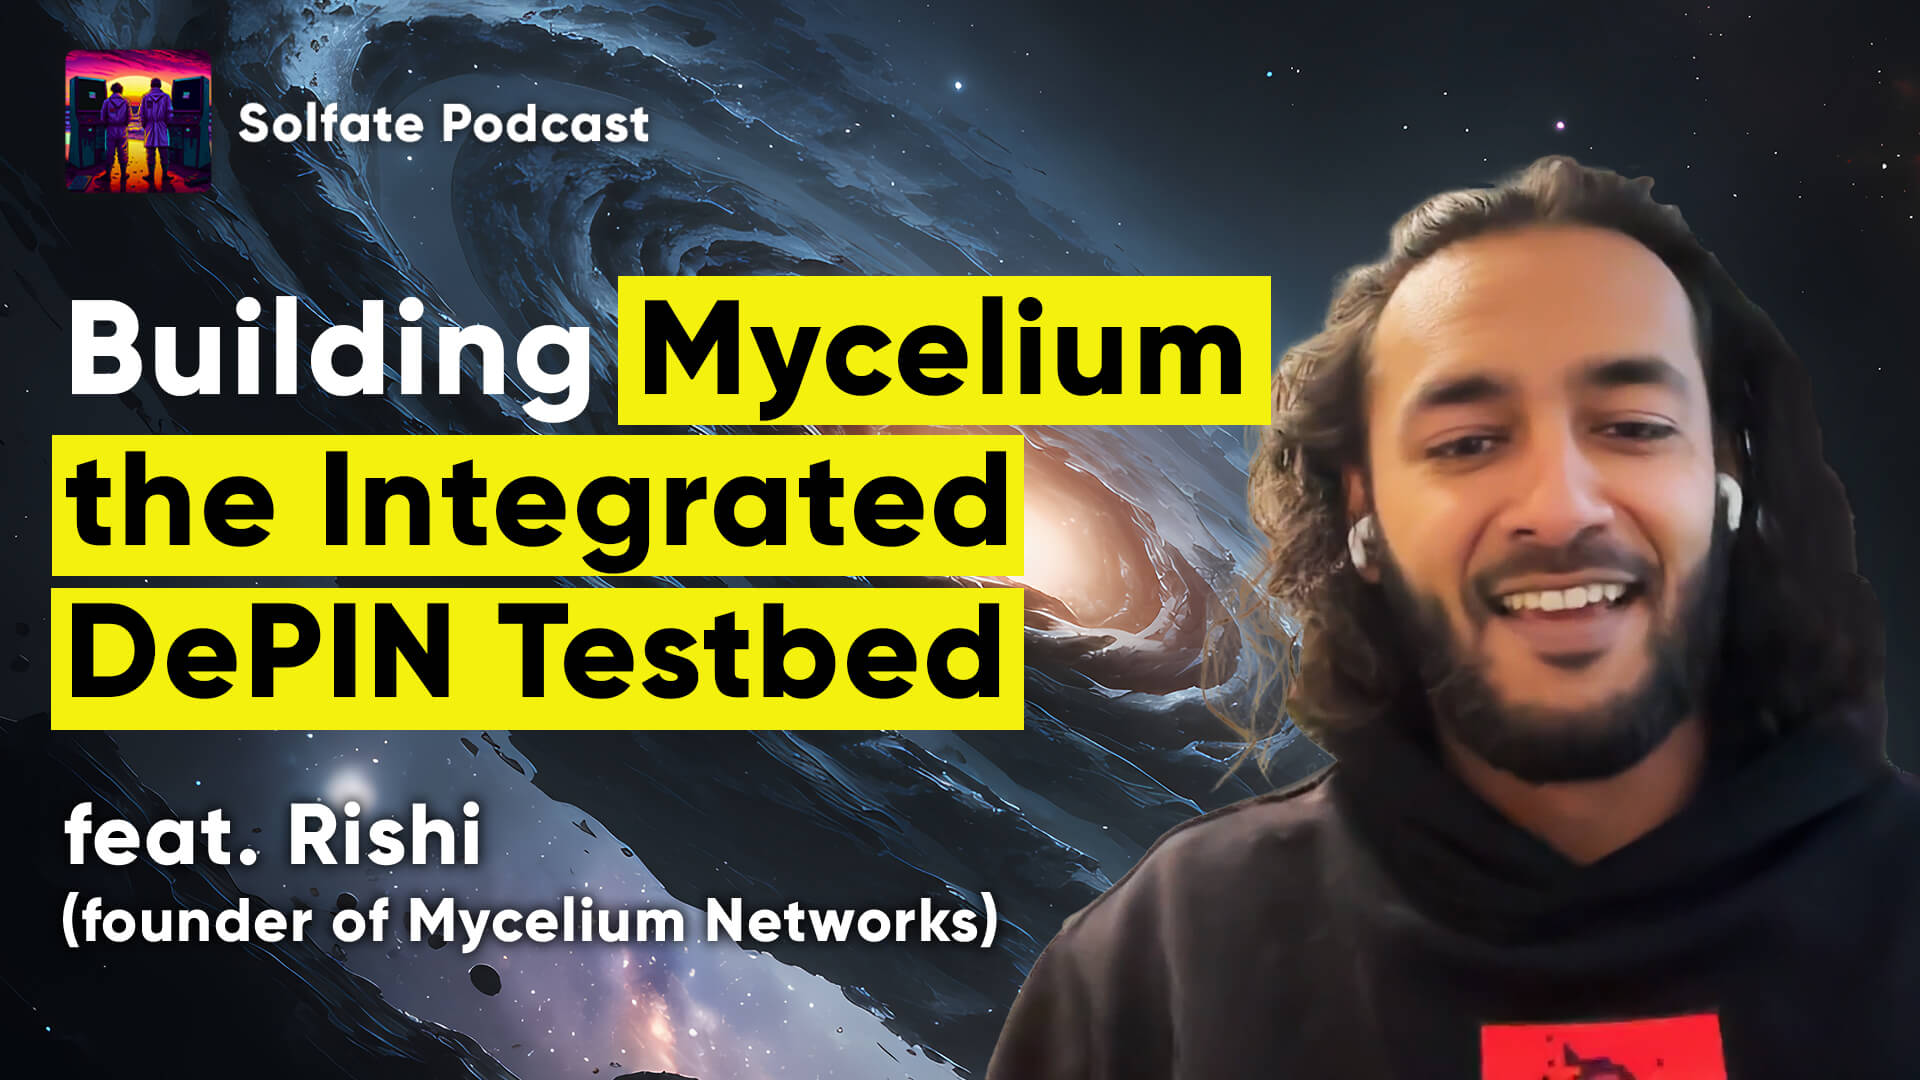 Building Mycelium, the Integrated DePIN Testbed (feat. Rishi founder of Mycelium Network)